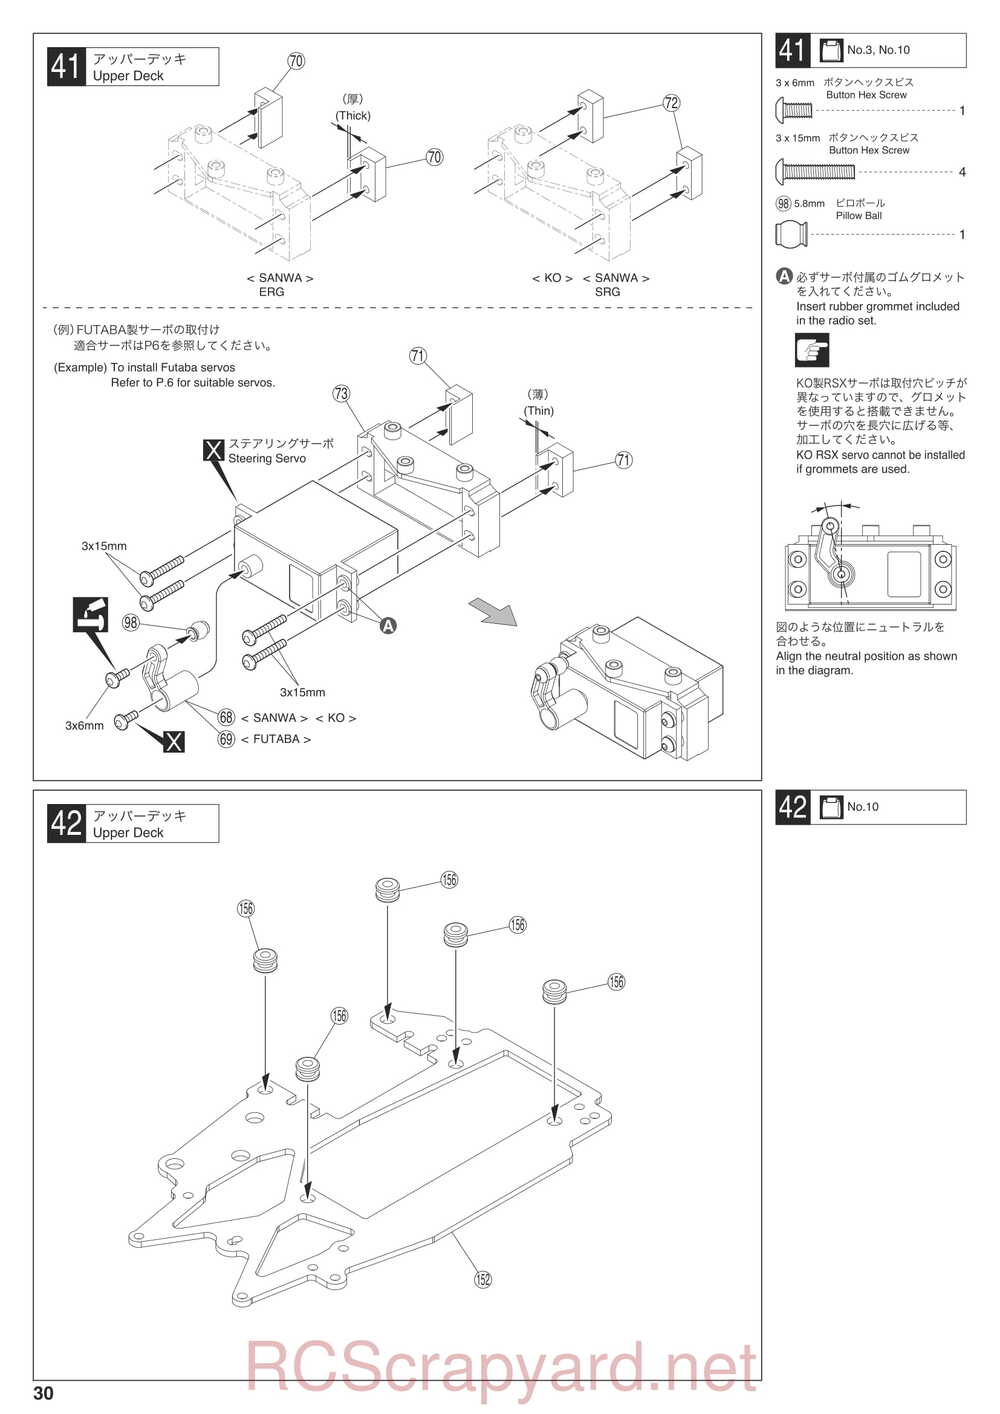 Kyosho - 31265 - V-ONE-R4 - Manual - Page 30